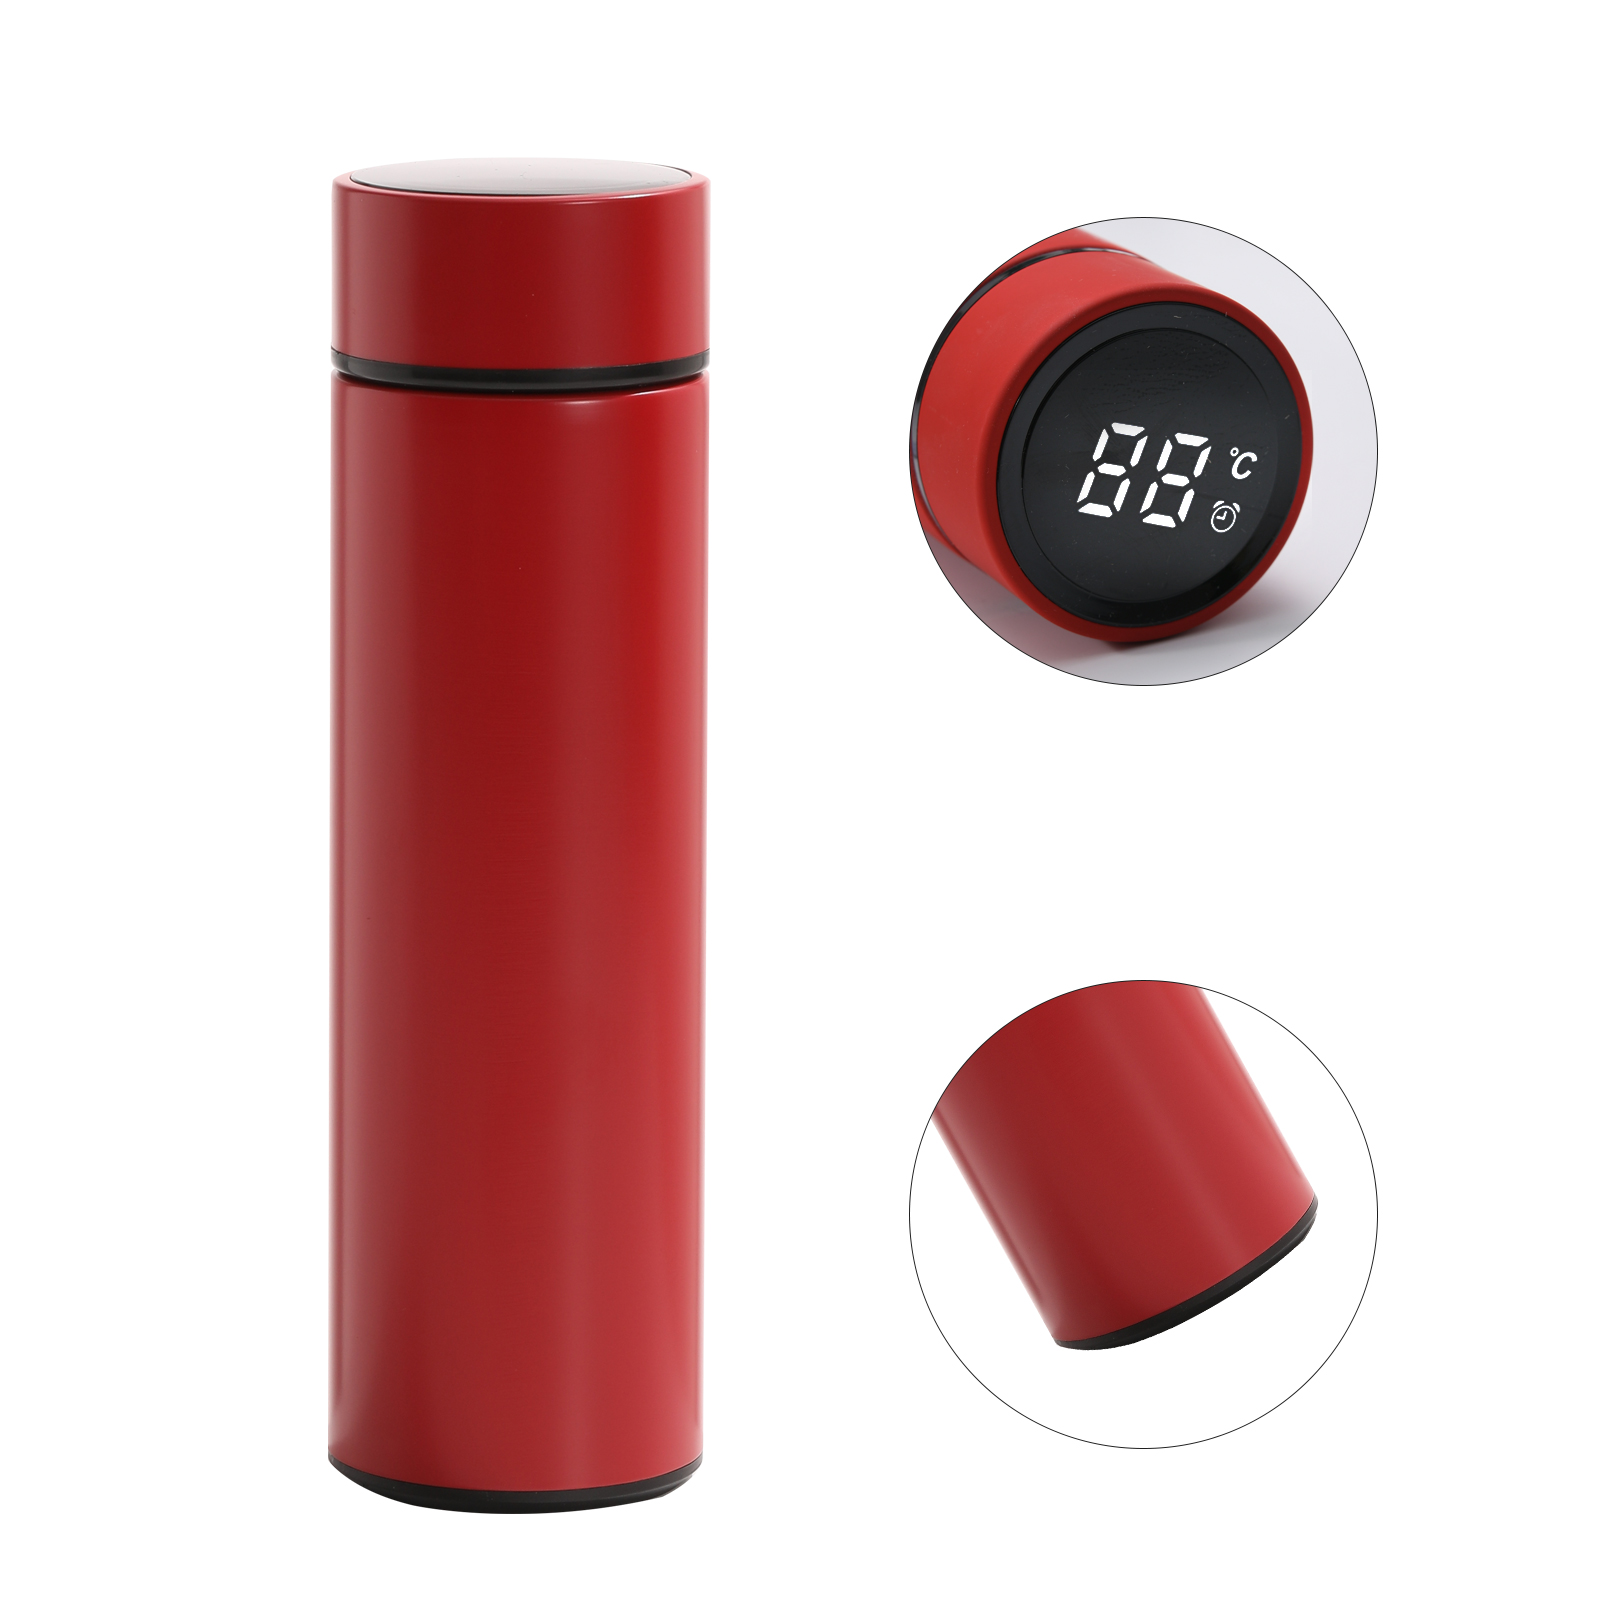 Stainless Steel Temperature Measuring Digital Display Smart Thermos Cup